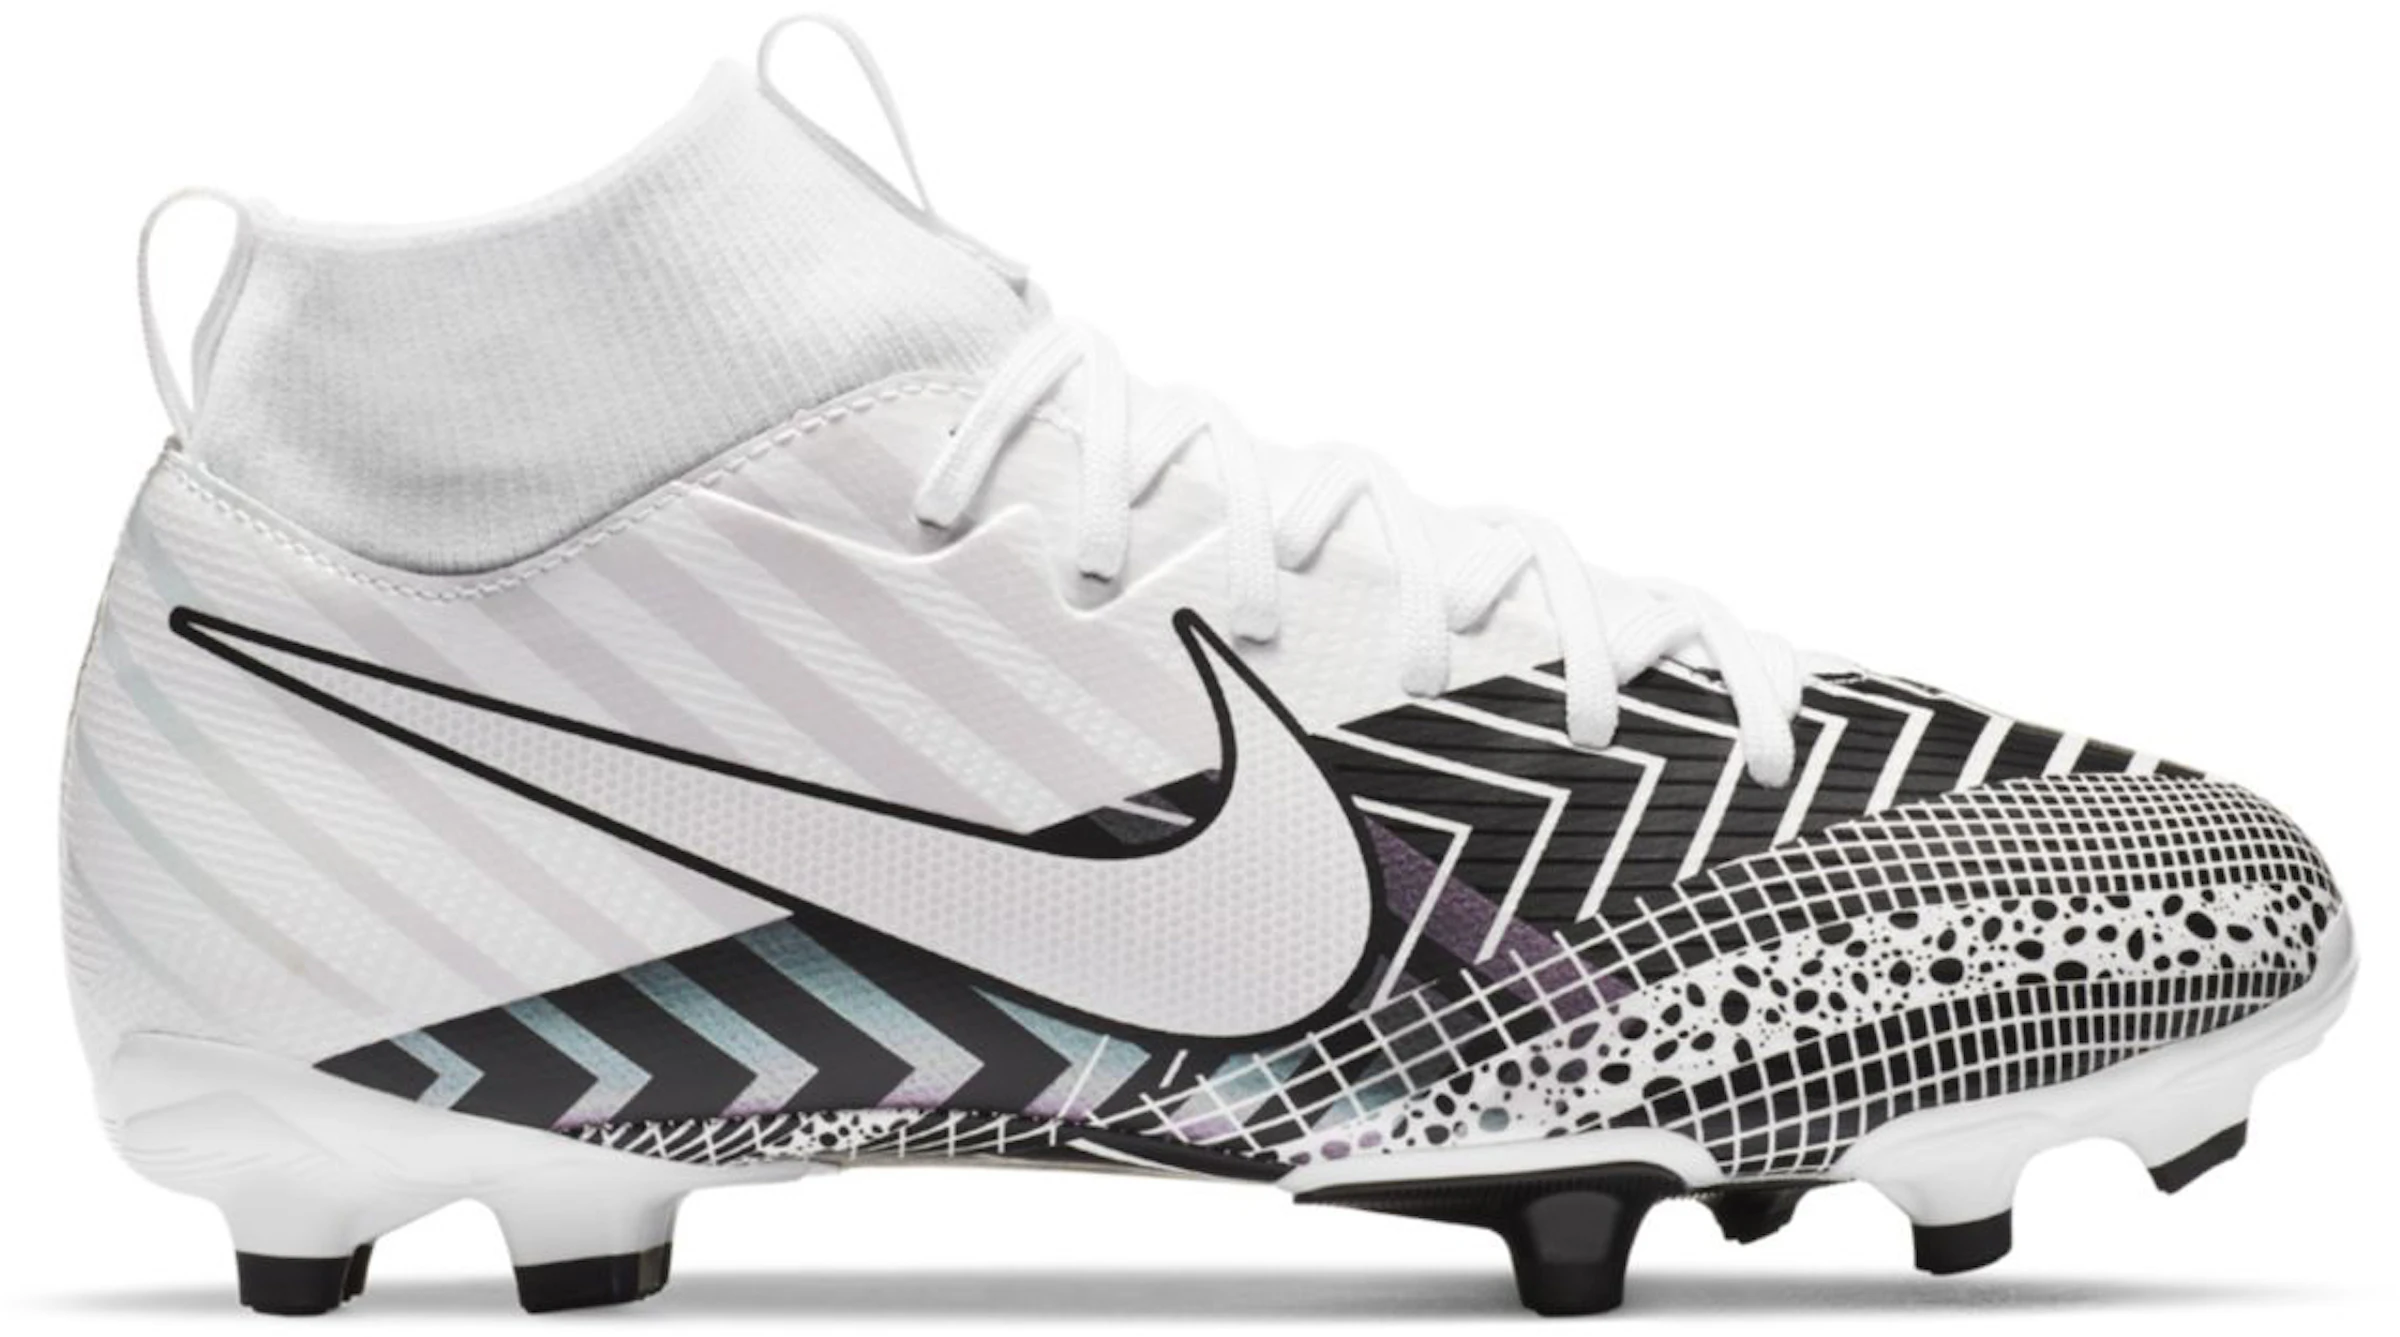 Nike Mercurial Superfly 7 Academy MDS MG Speed White Black (PS) - BQ5409-110 - ES